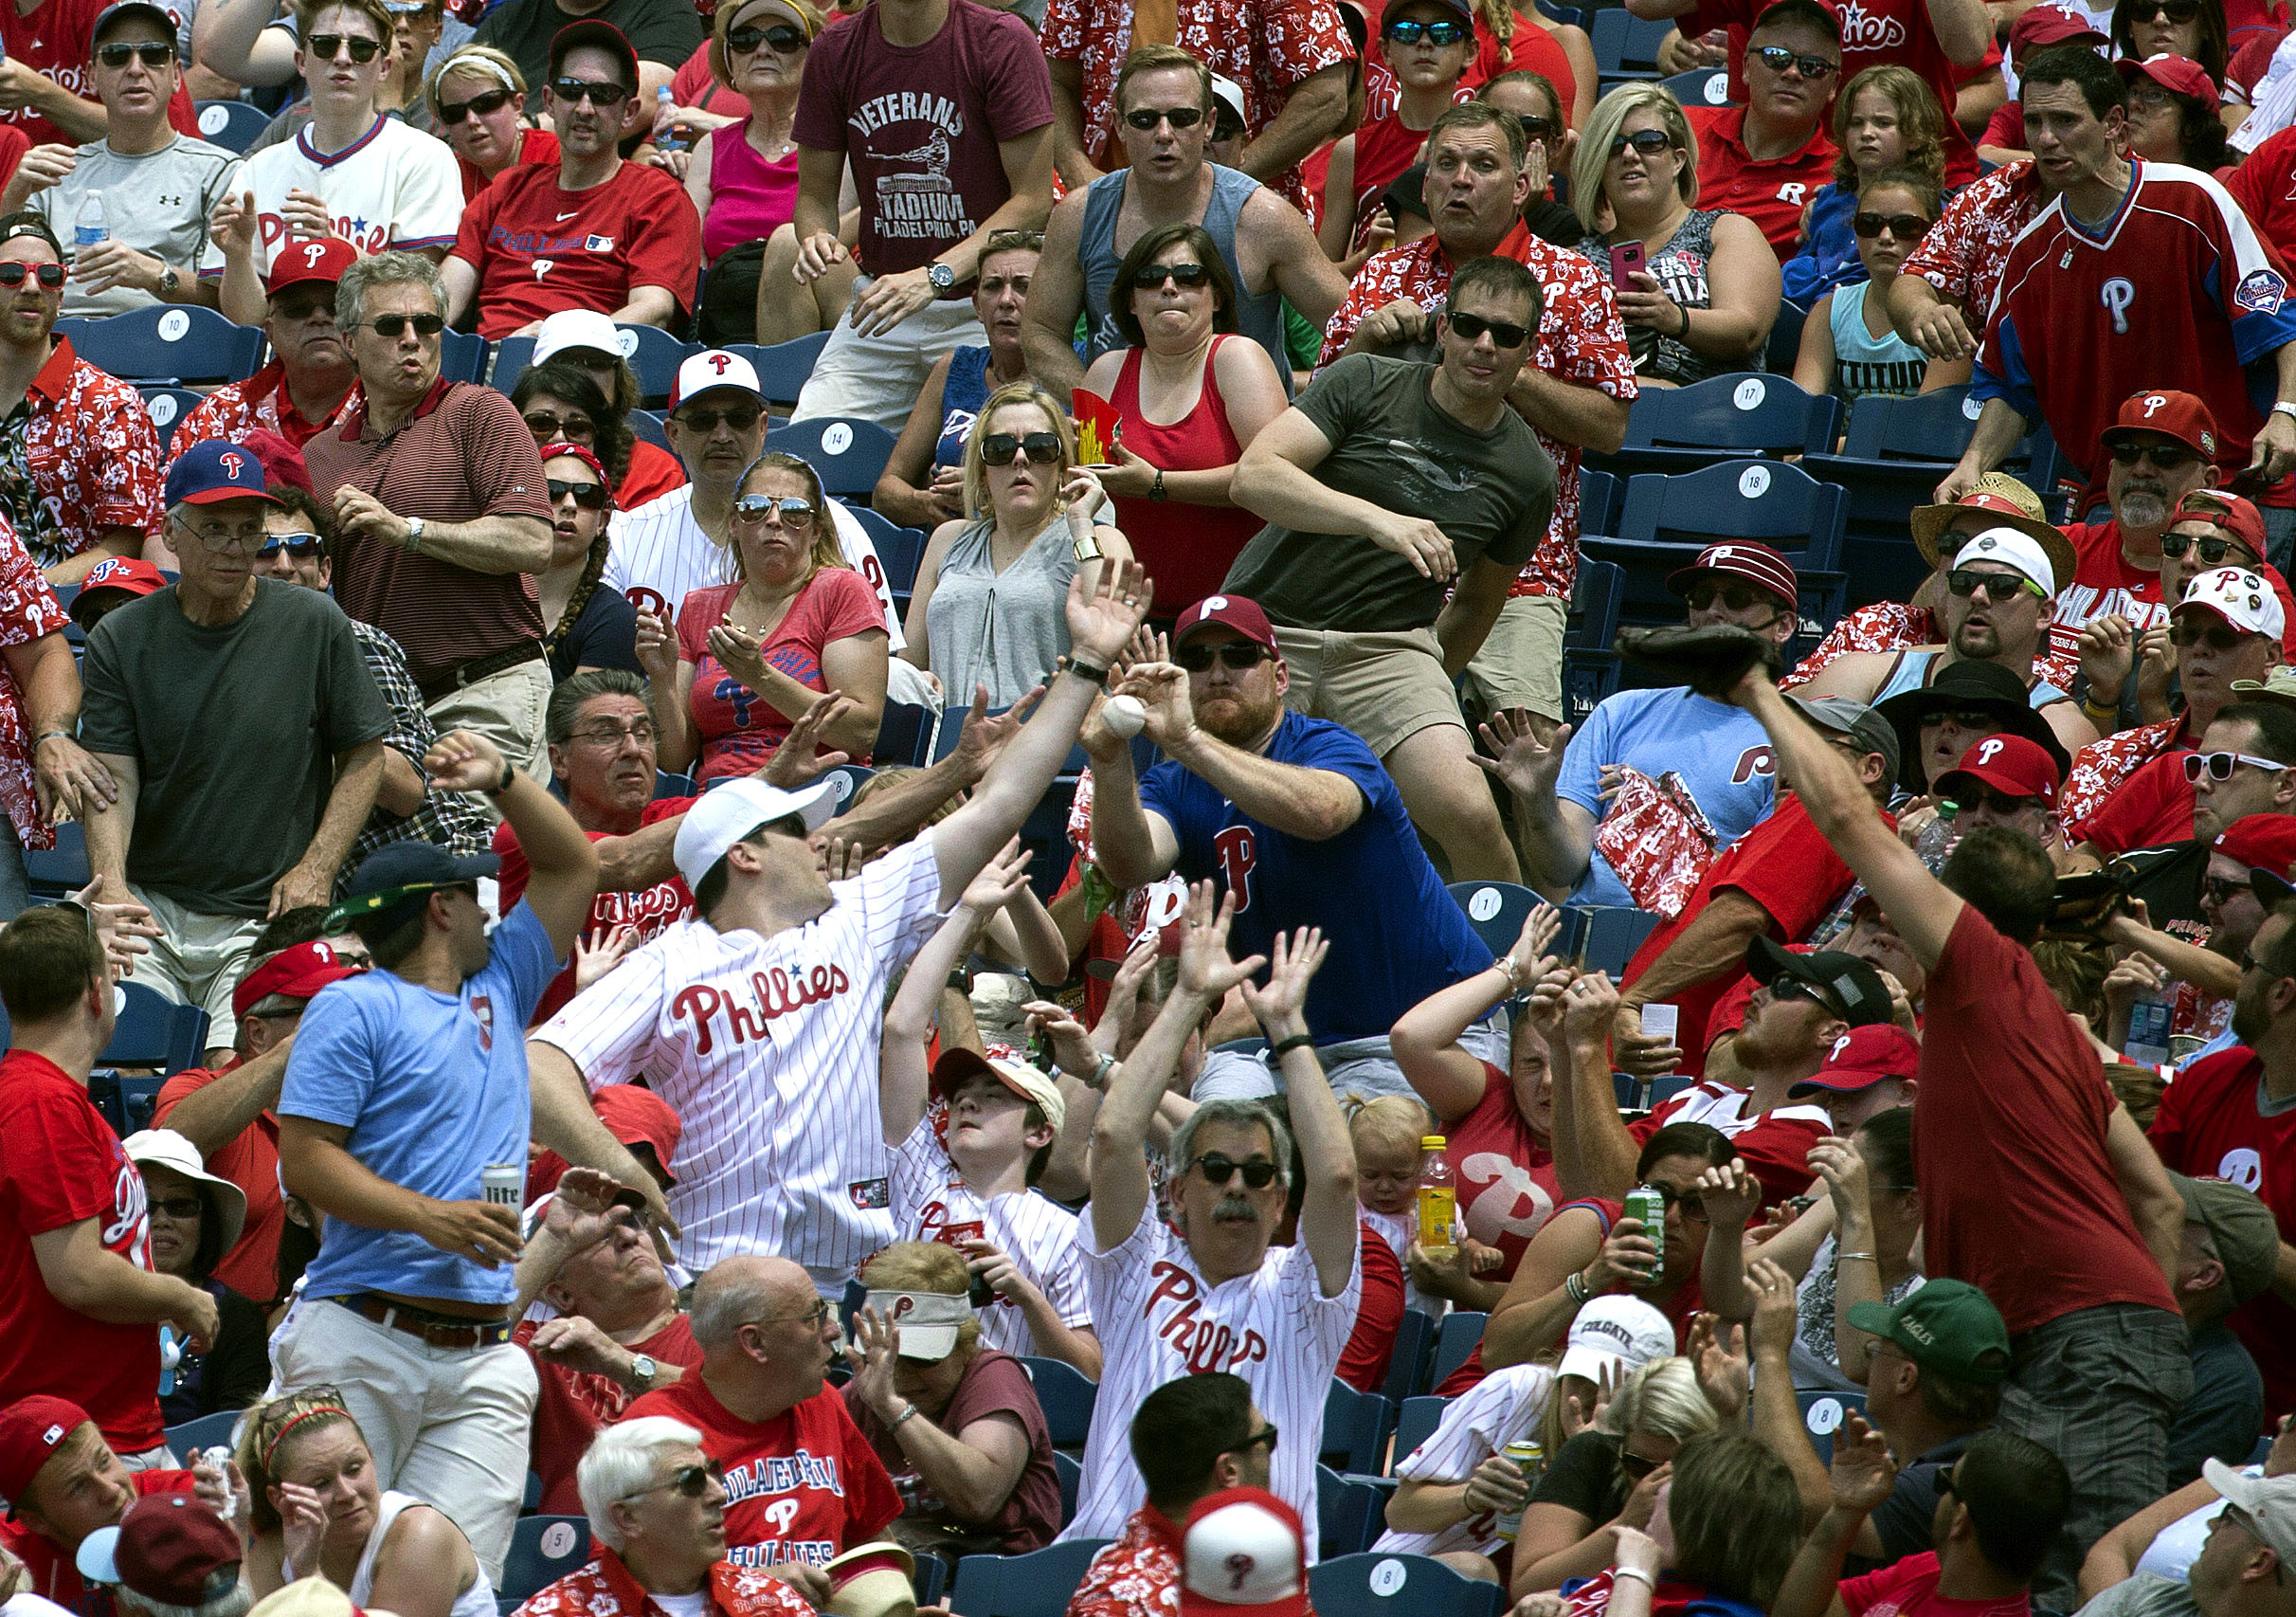 10-year-old Phillies fan gives foul ball to crying girl